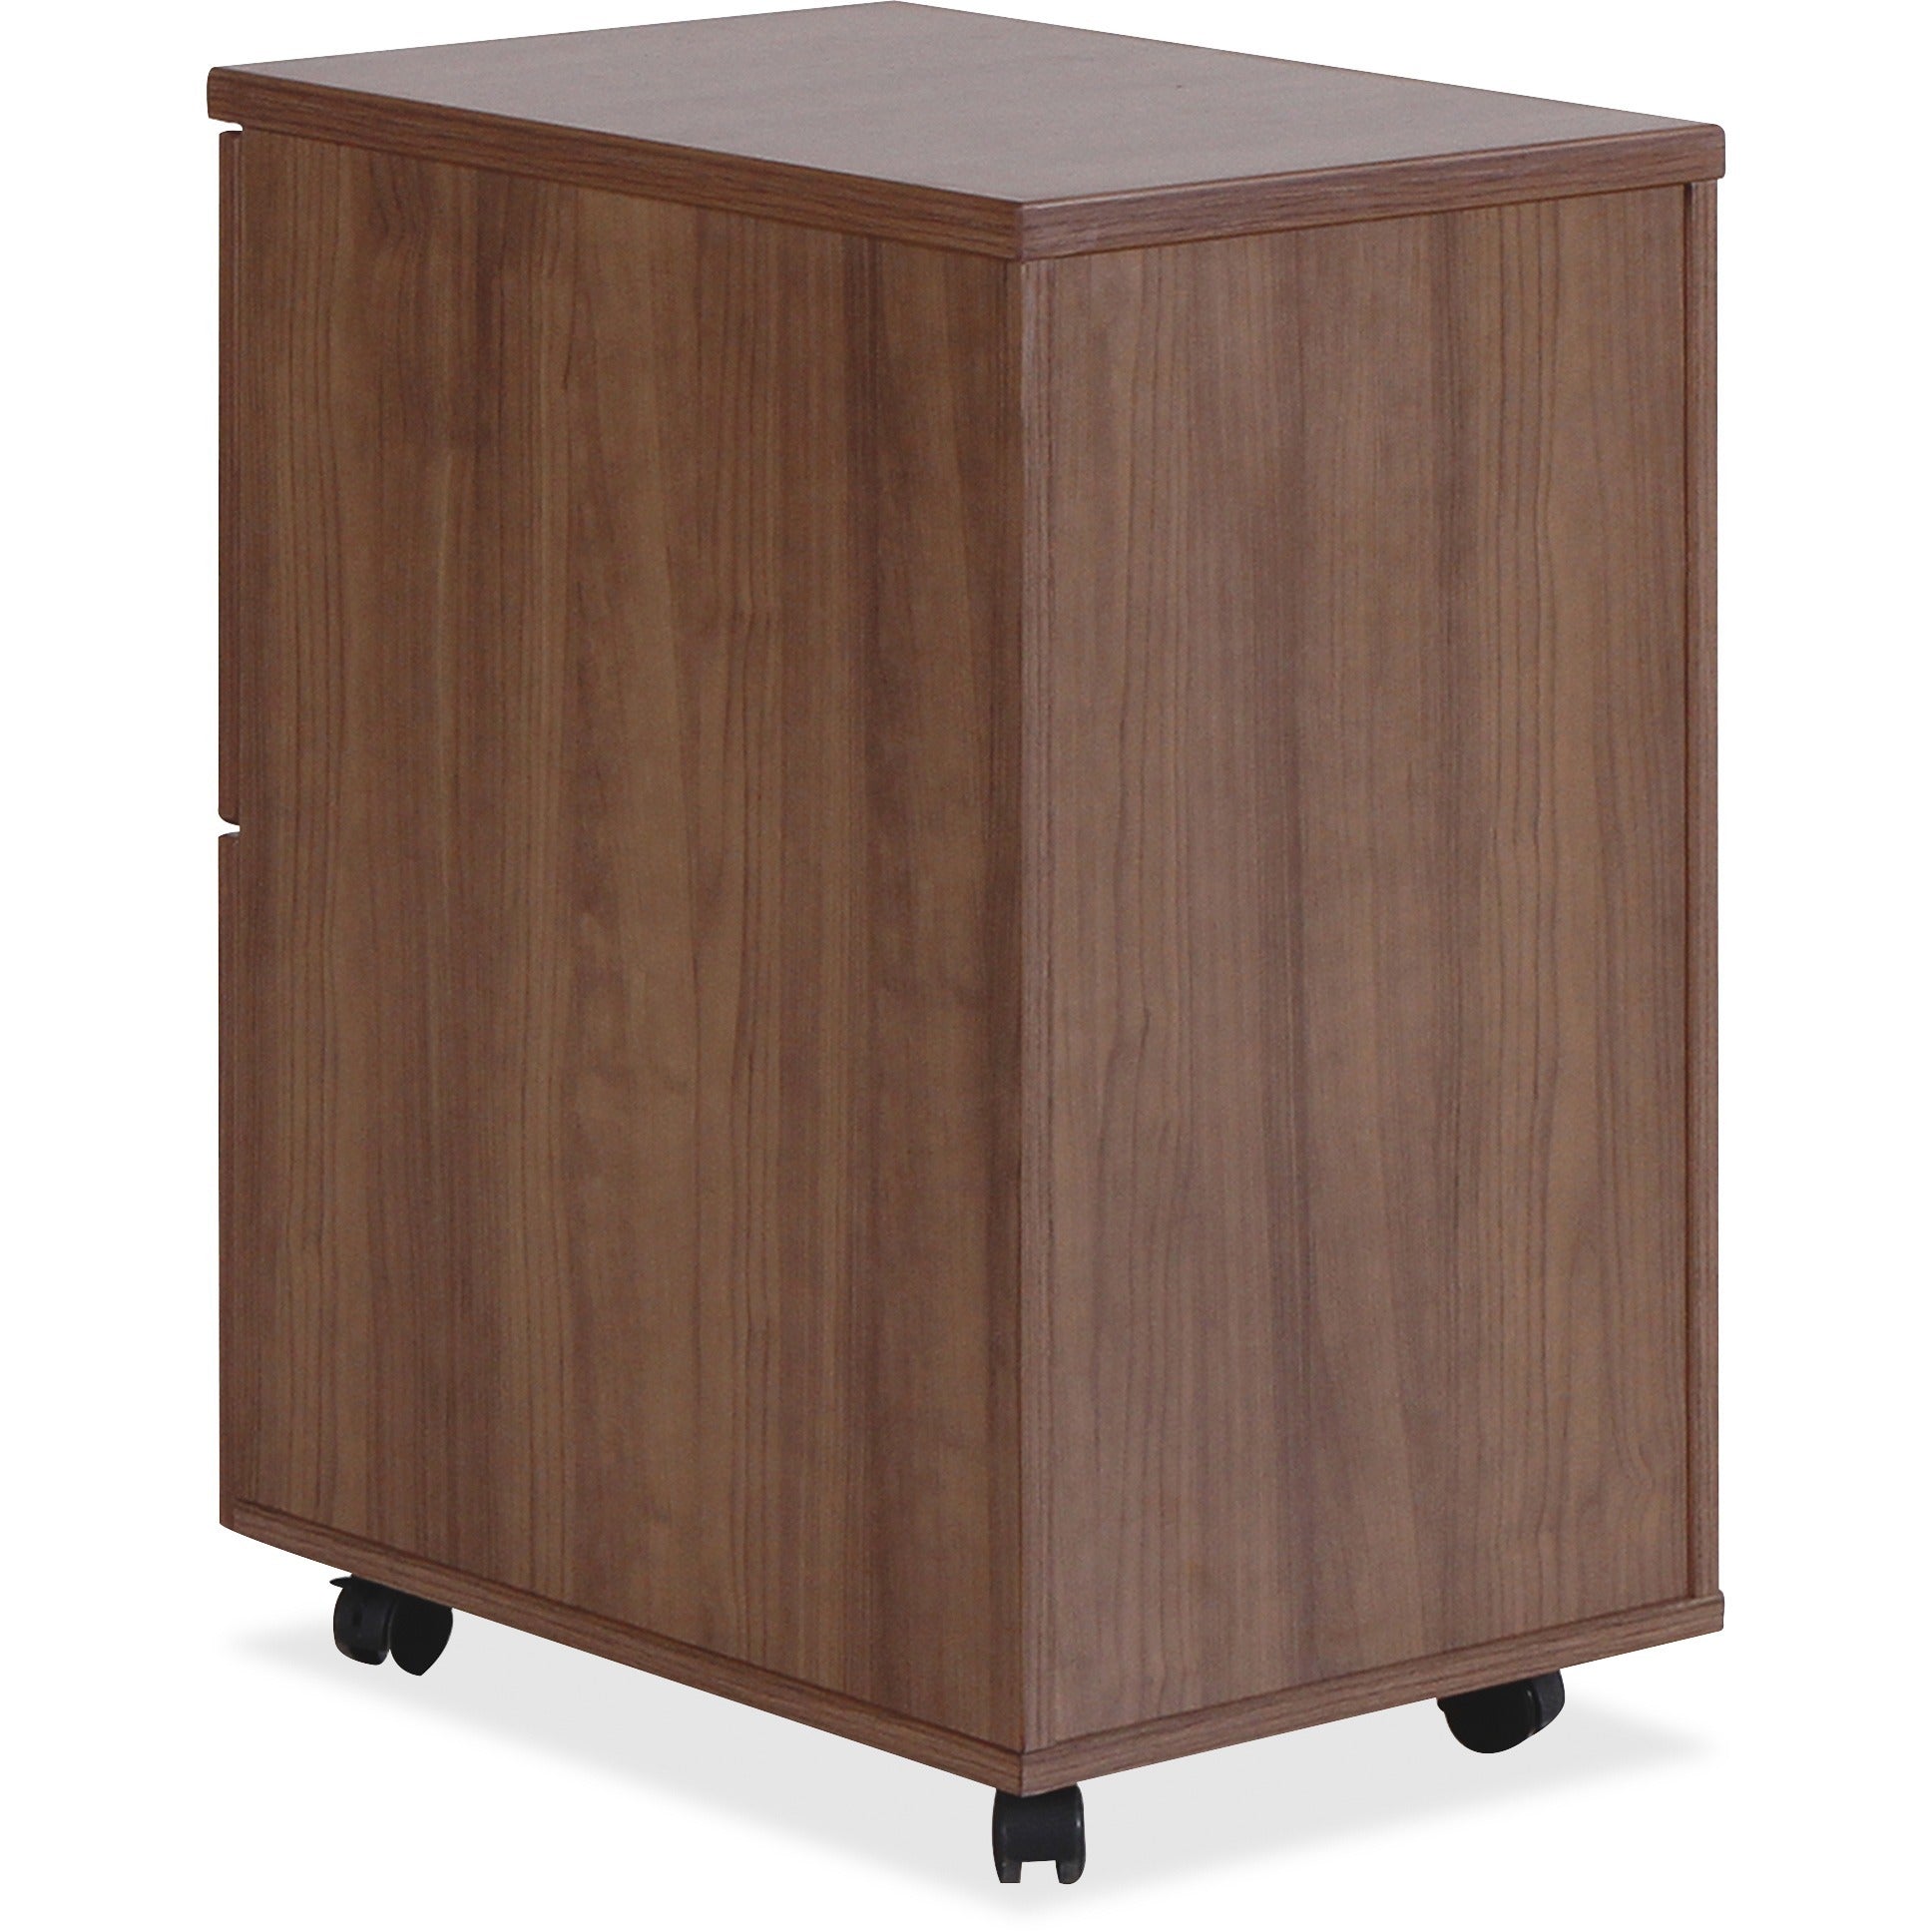 Lorell Essentials Series File/File Mobile File Cabinet - 15.8" x 22"28.4" Pedestal, 1.5" Caster - 2 x File Drawer(s) - Finish: Laminate, Walnut - Mobility, Built-in Hangrail, Locking Pedestal, Dual Wheel Caster - For File, File Folder - 